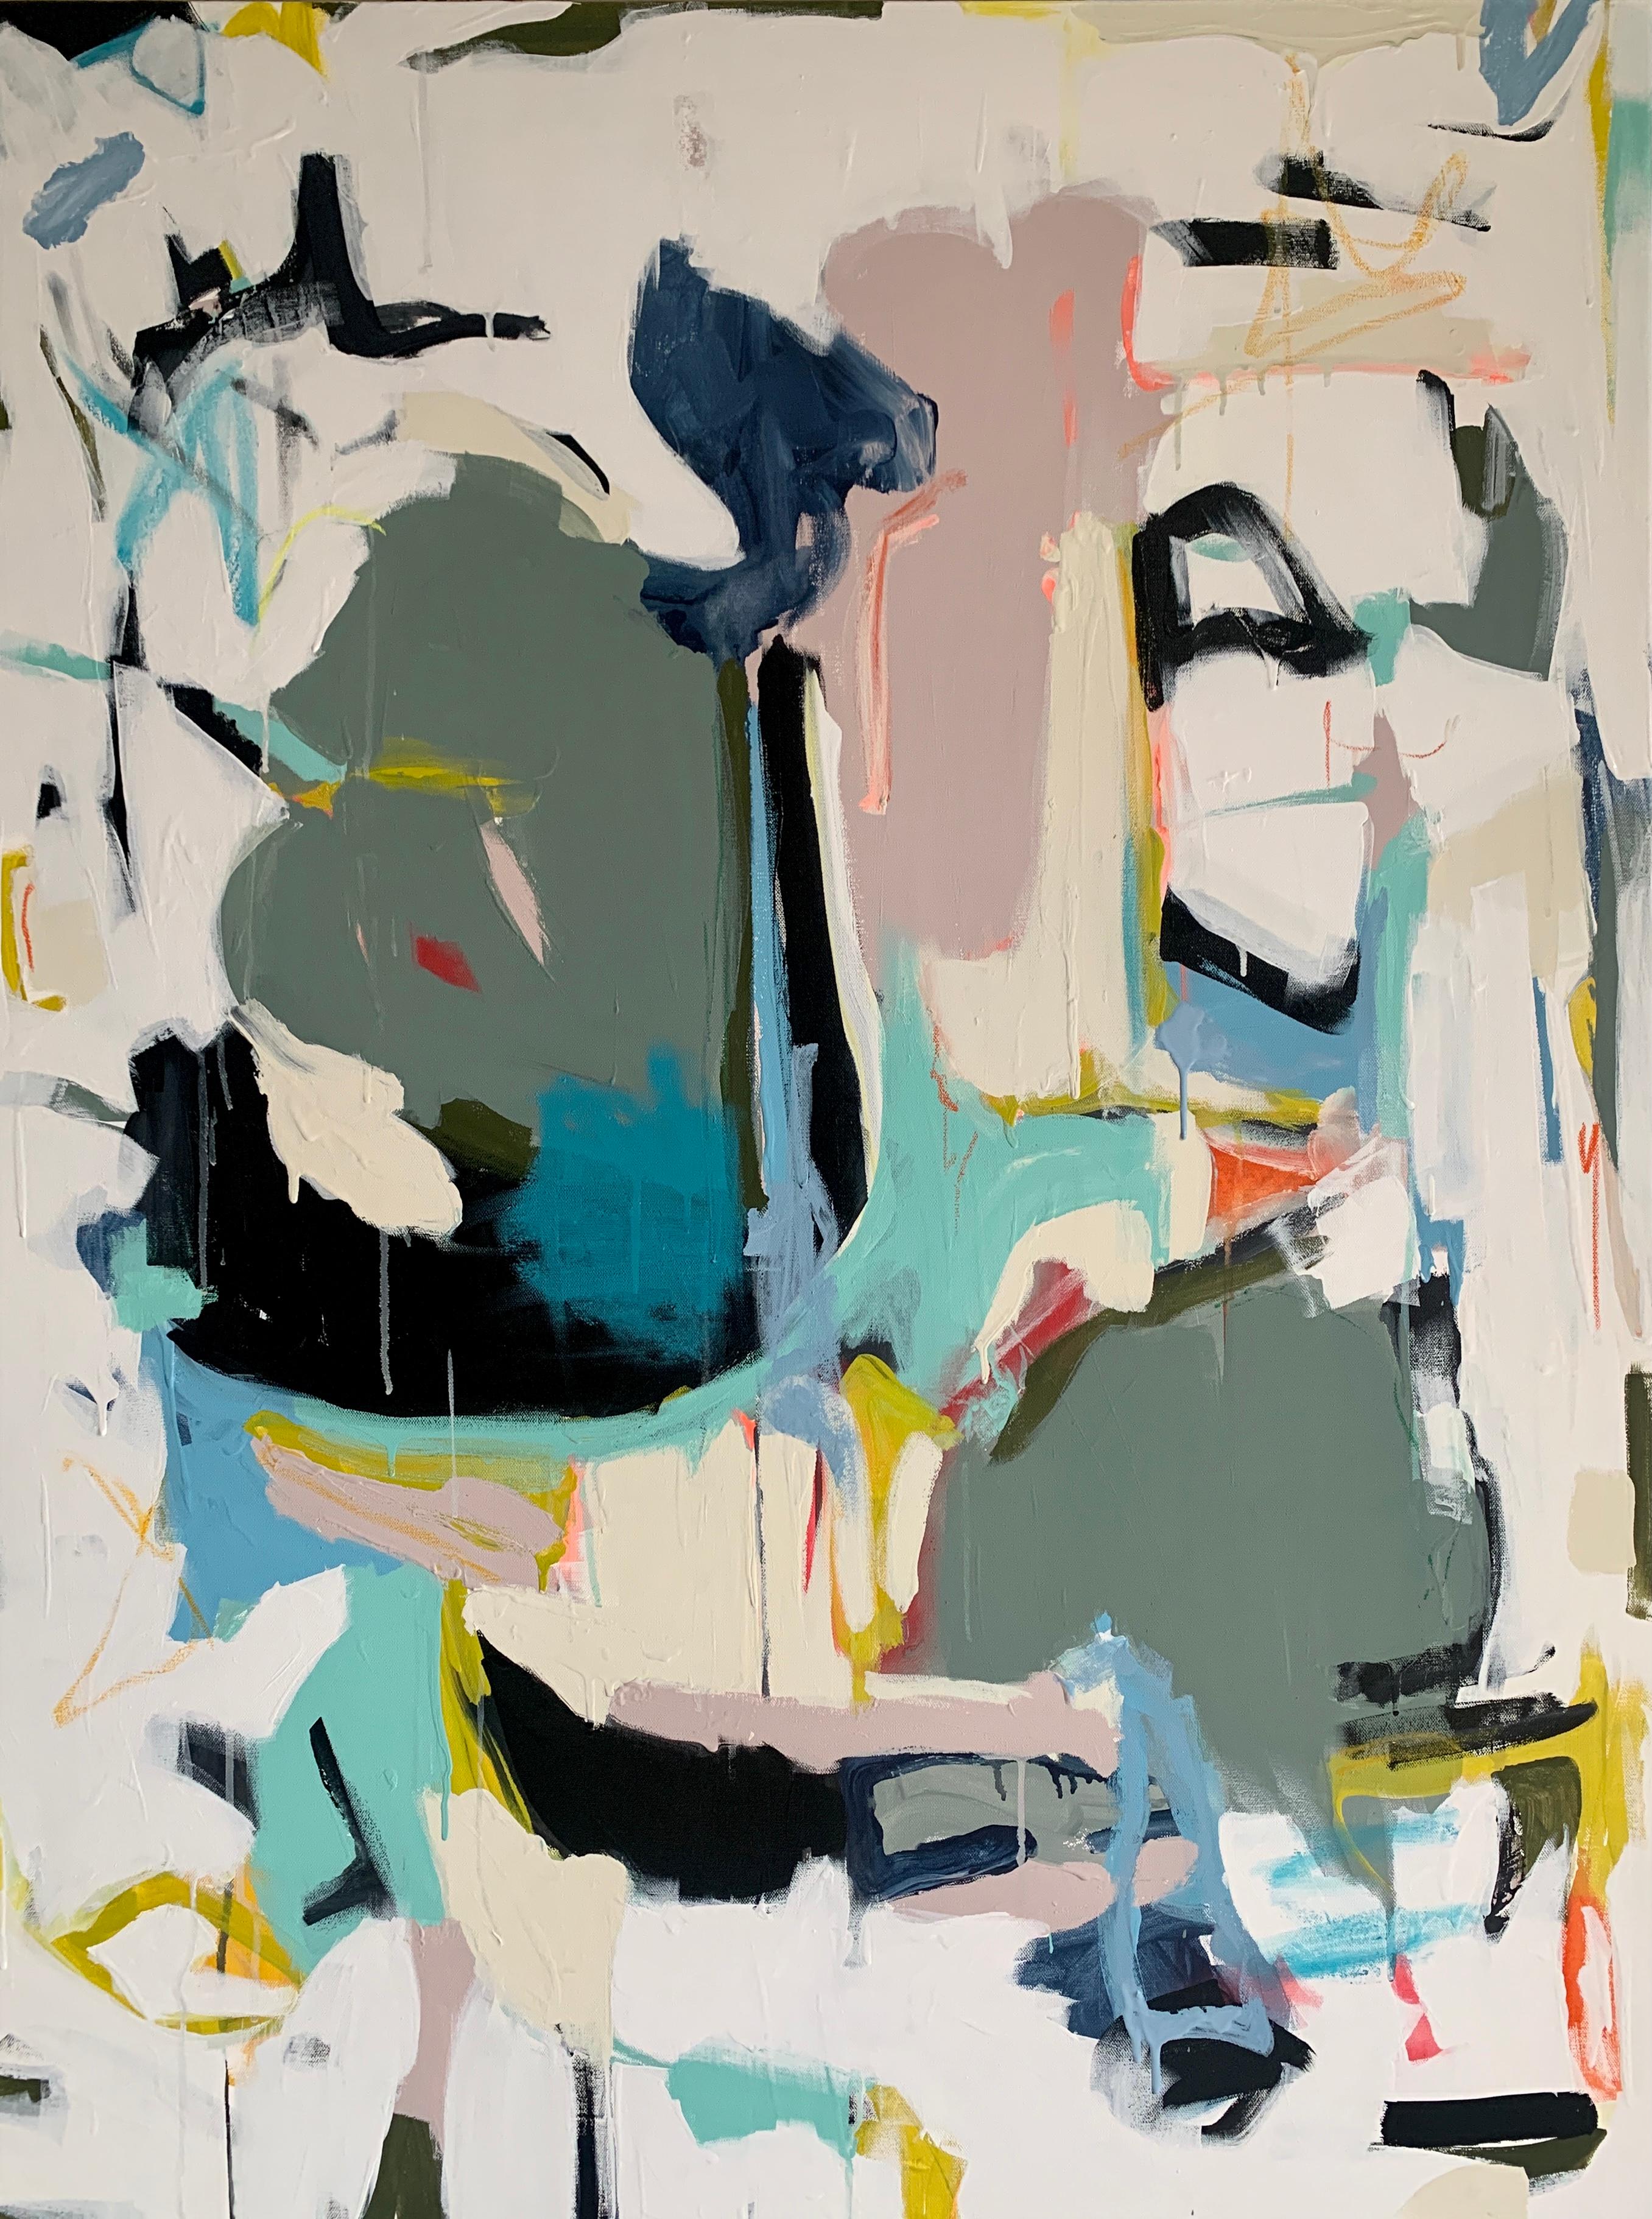 'Essential Assignments' is a large mixed media on canvas abstract painting of vertical format created by American artist Annie King in 2021. Featuring a palette made of  black, blue, yellow, pink, green and other tones, this painting showcases